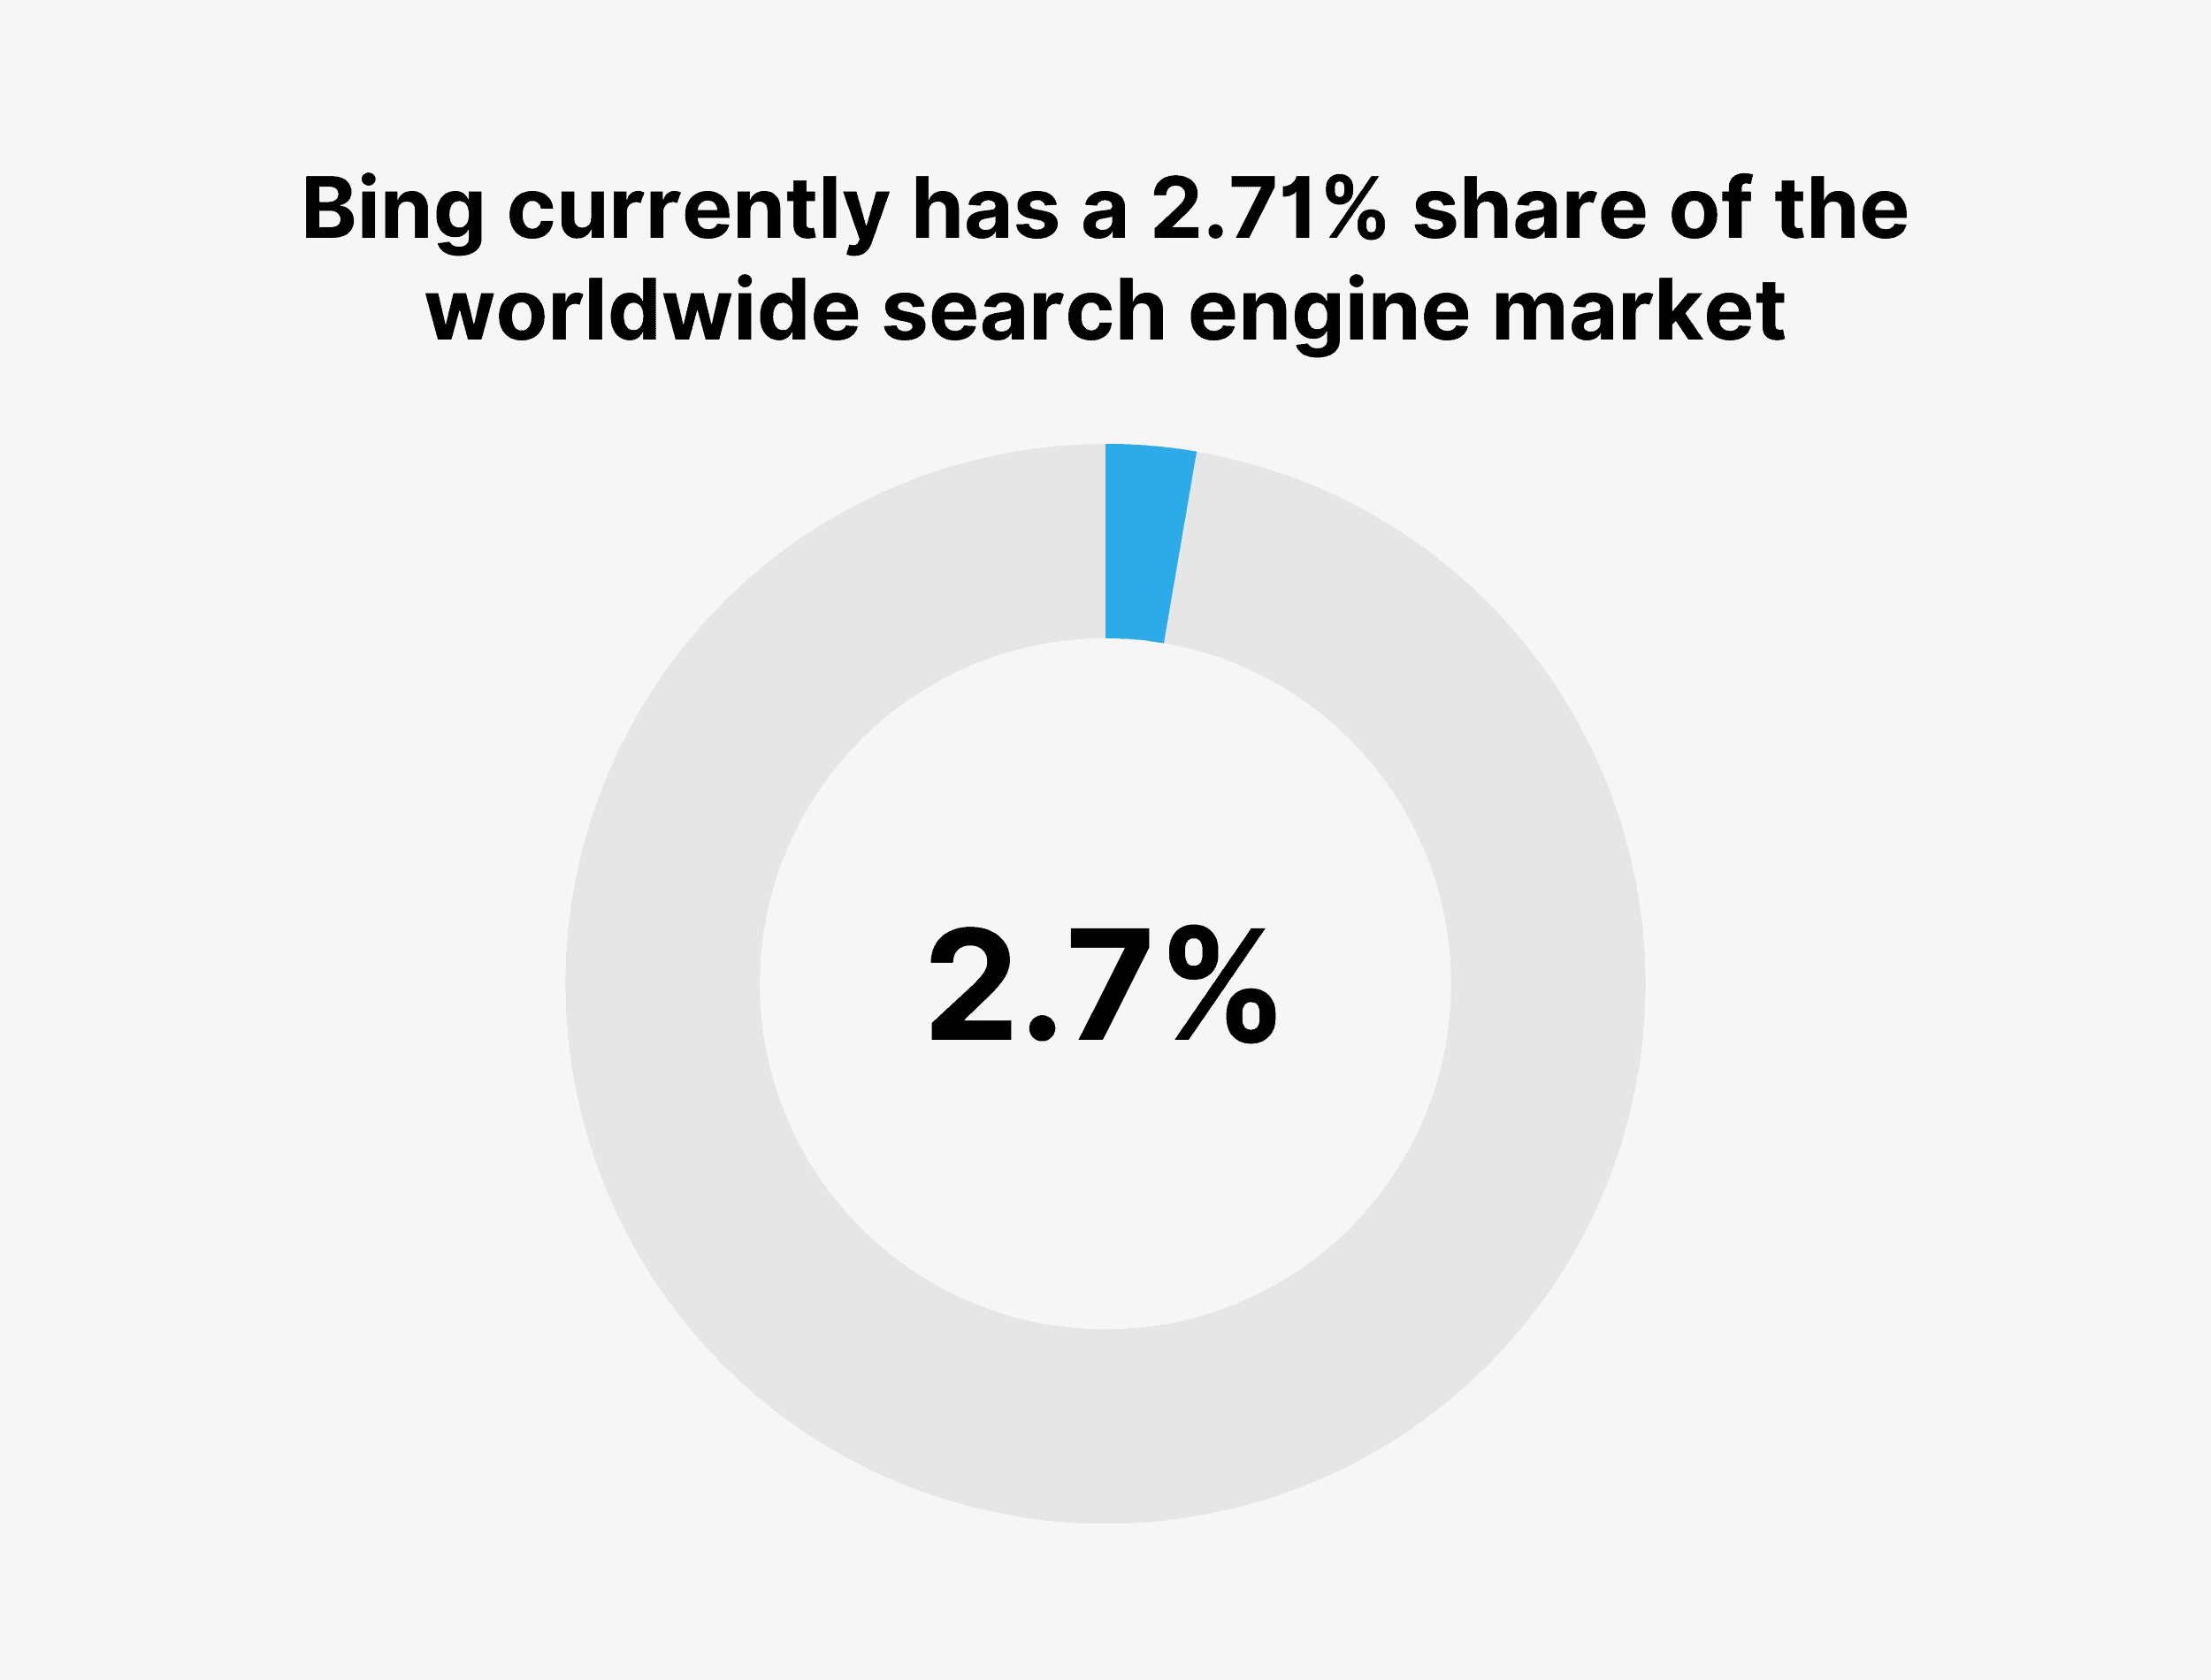 Bing currently has a 2.71% share of the worldwide search engine market